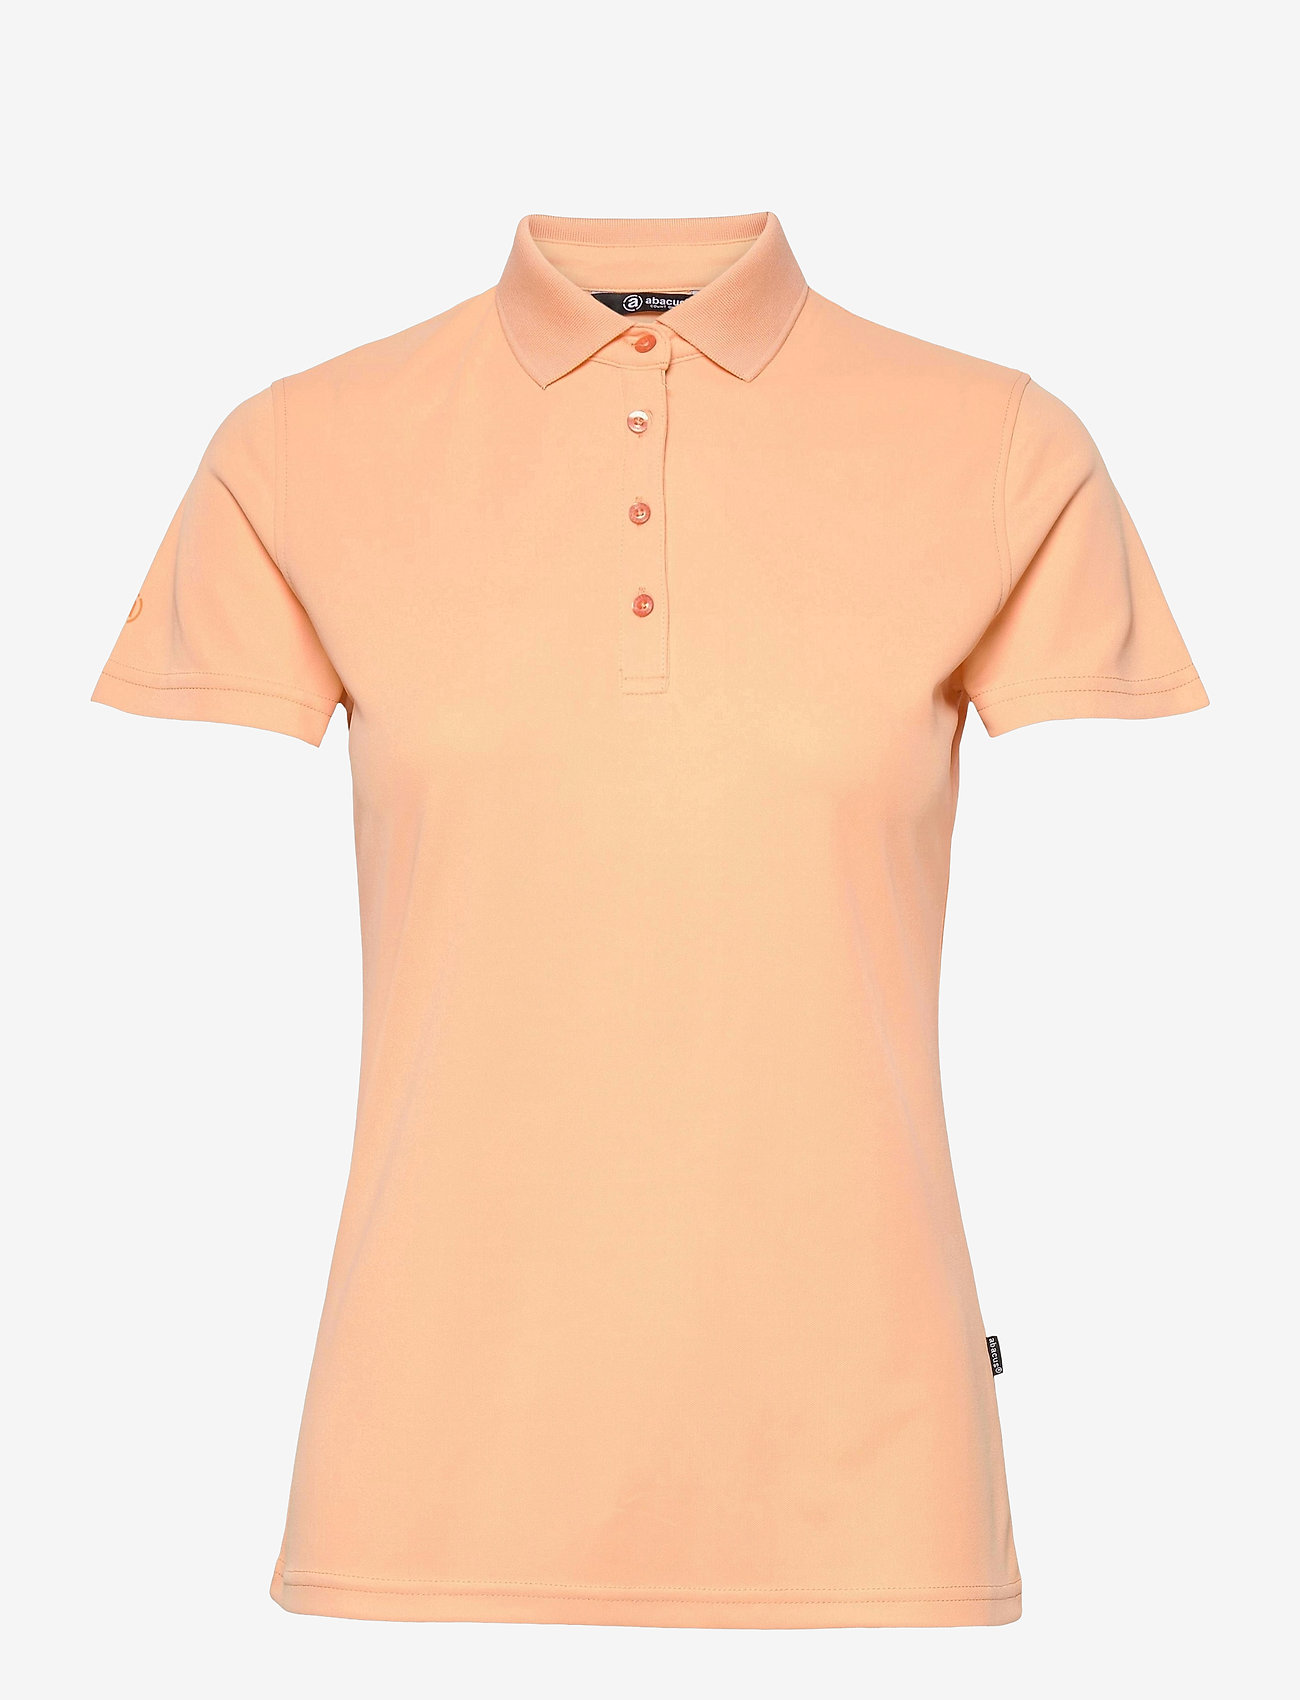 Abacus - Ladies Cray Drycool Polo